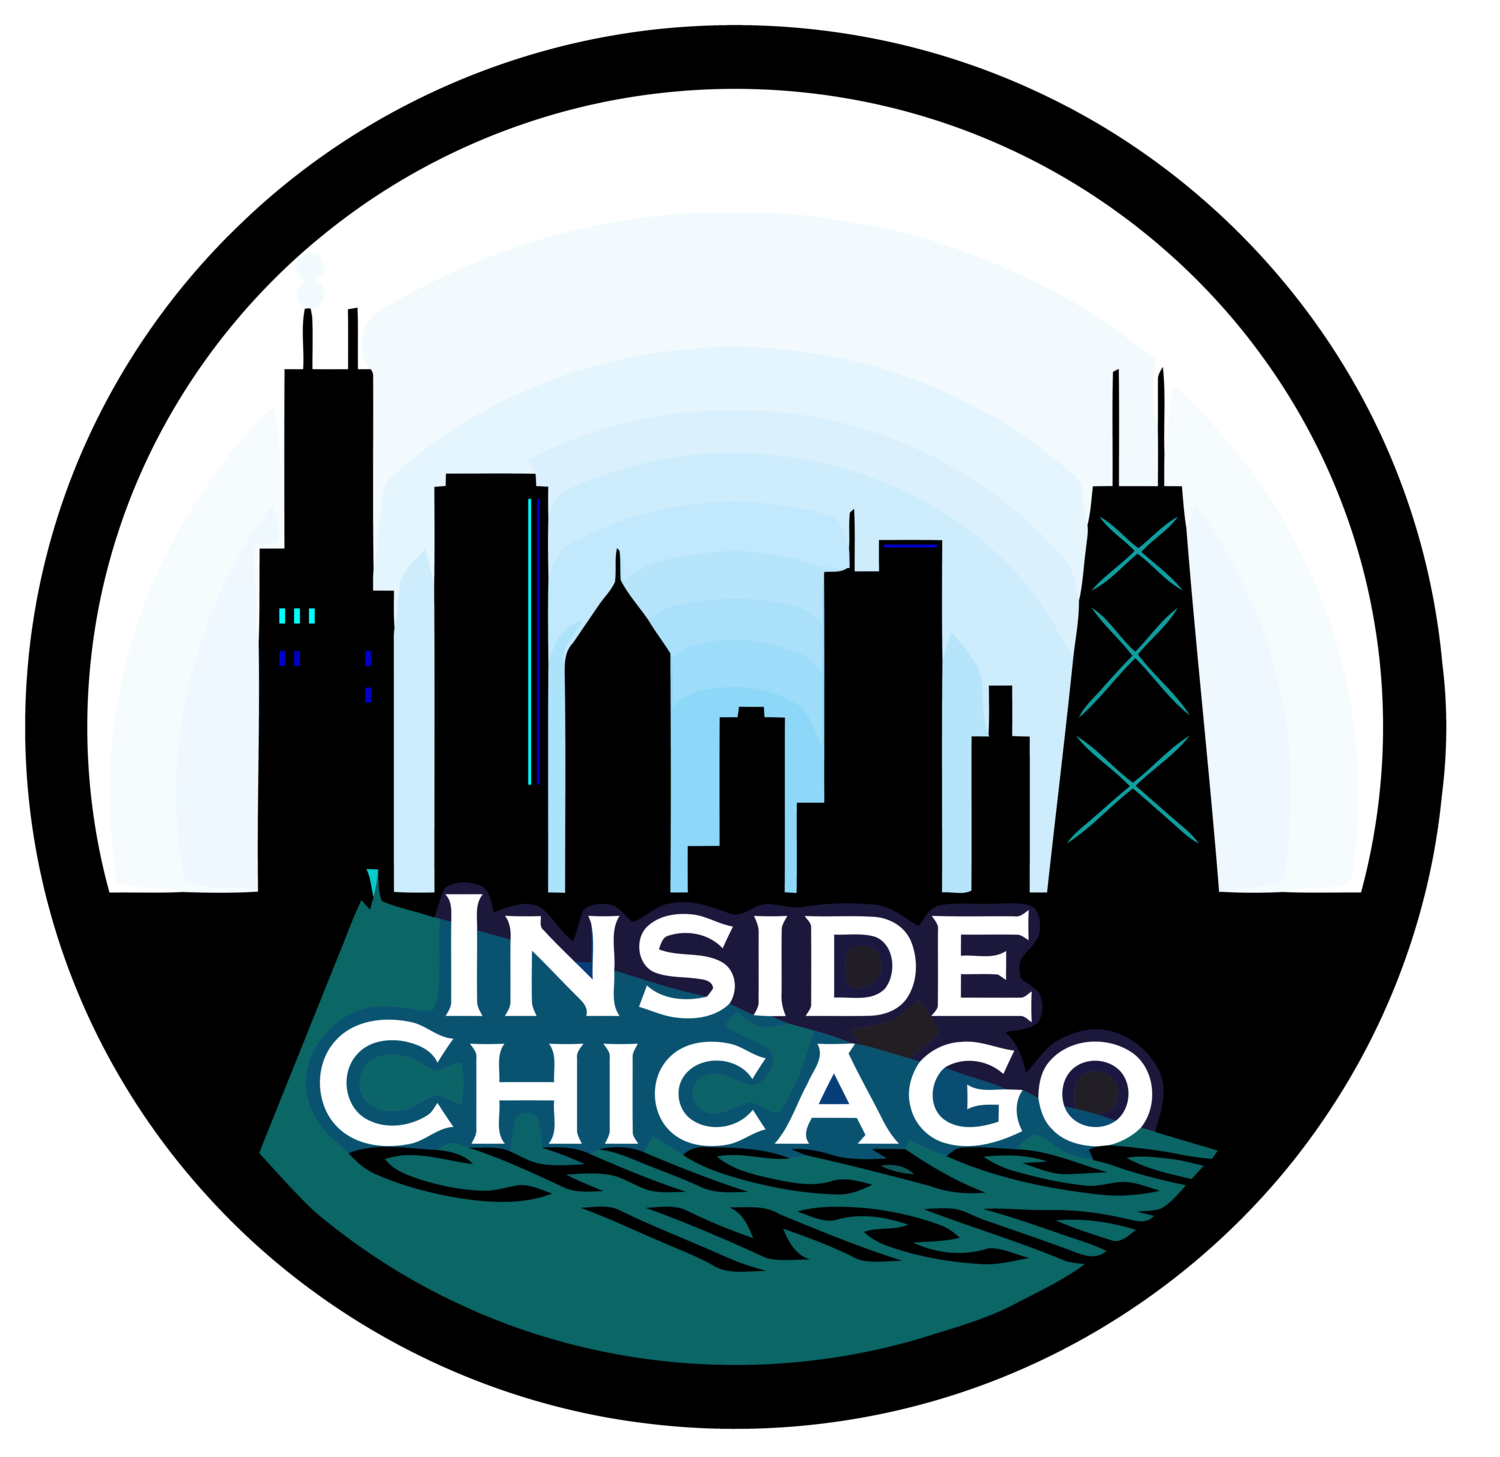 Inside Chicago Walking Tours | Interior Architecture Tours of Chicago